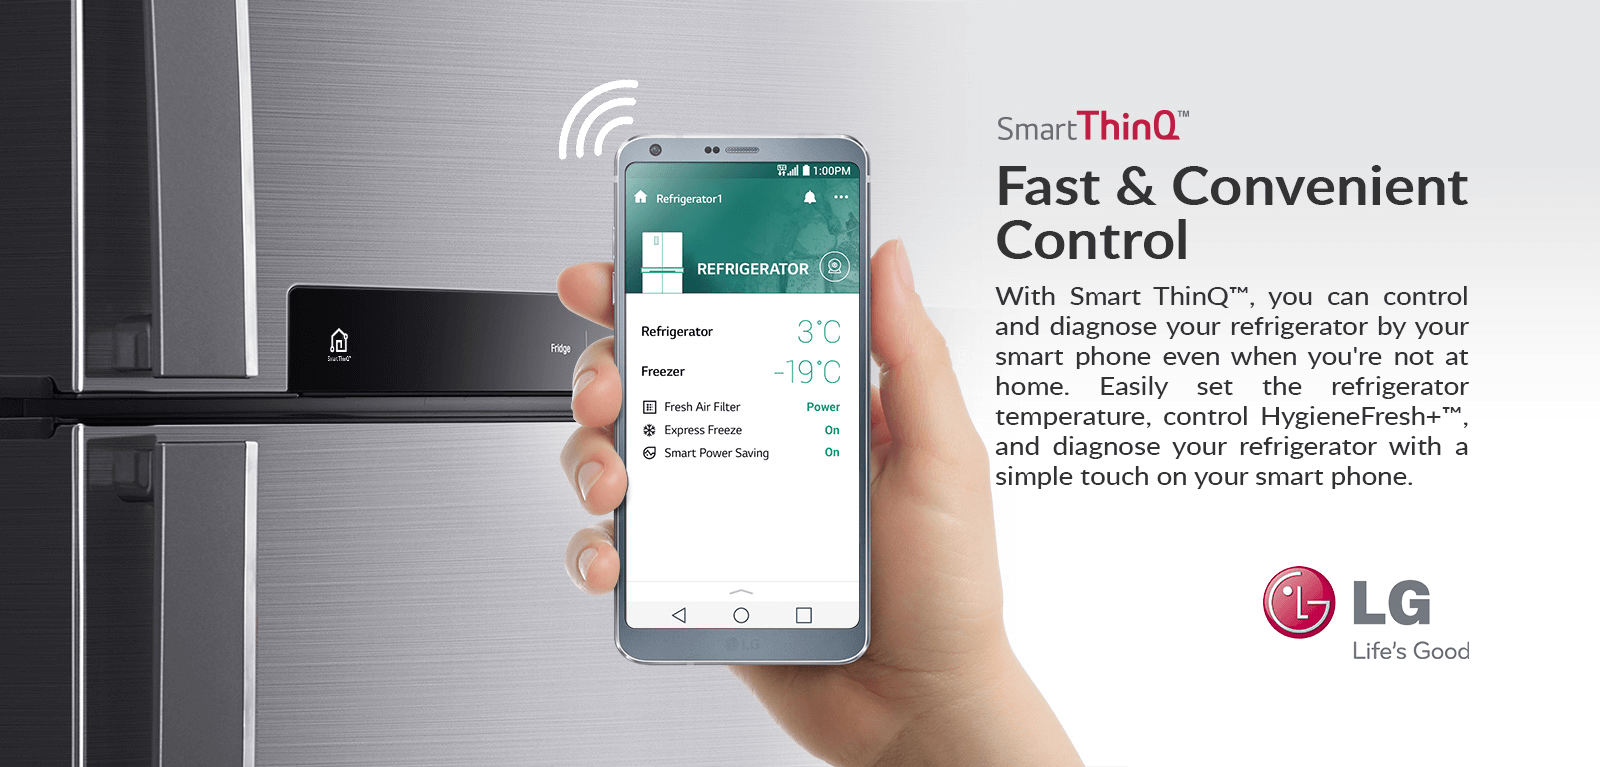 Fast & Convenient Control With Smart ThinQ™, you can control and diagnose your refrigerator by your smart phone even when you're not at home. Easily set the refrigerator temperature, control HygieneFresh+™, and diagnose your refrigerator with simple touch on your smart phone.